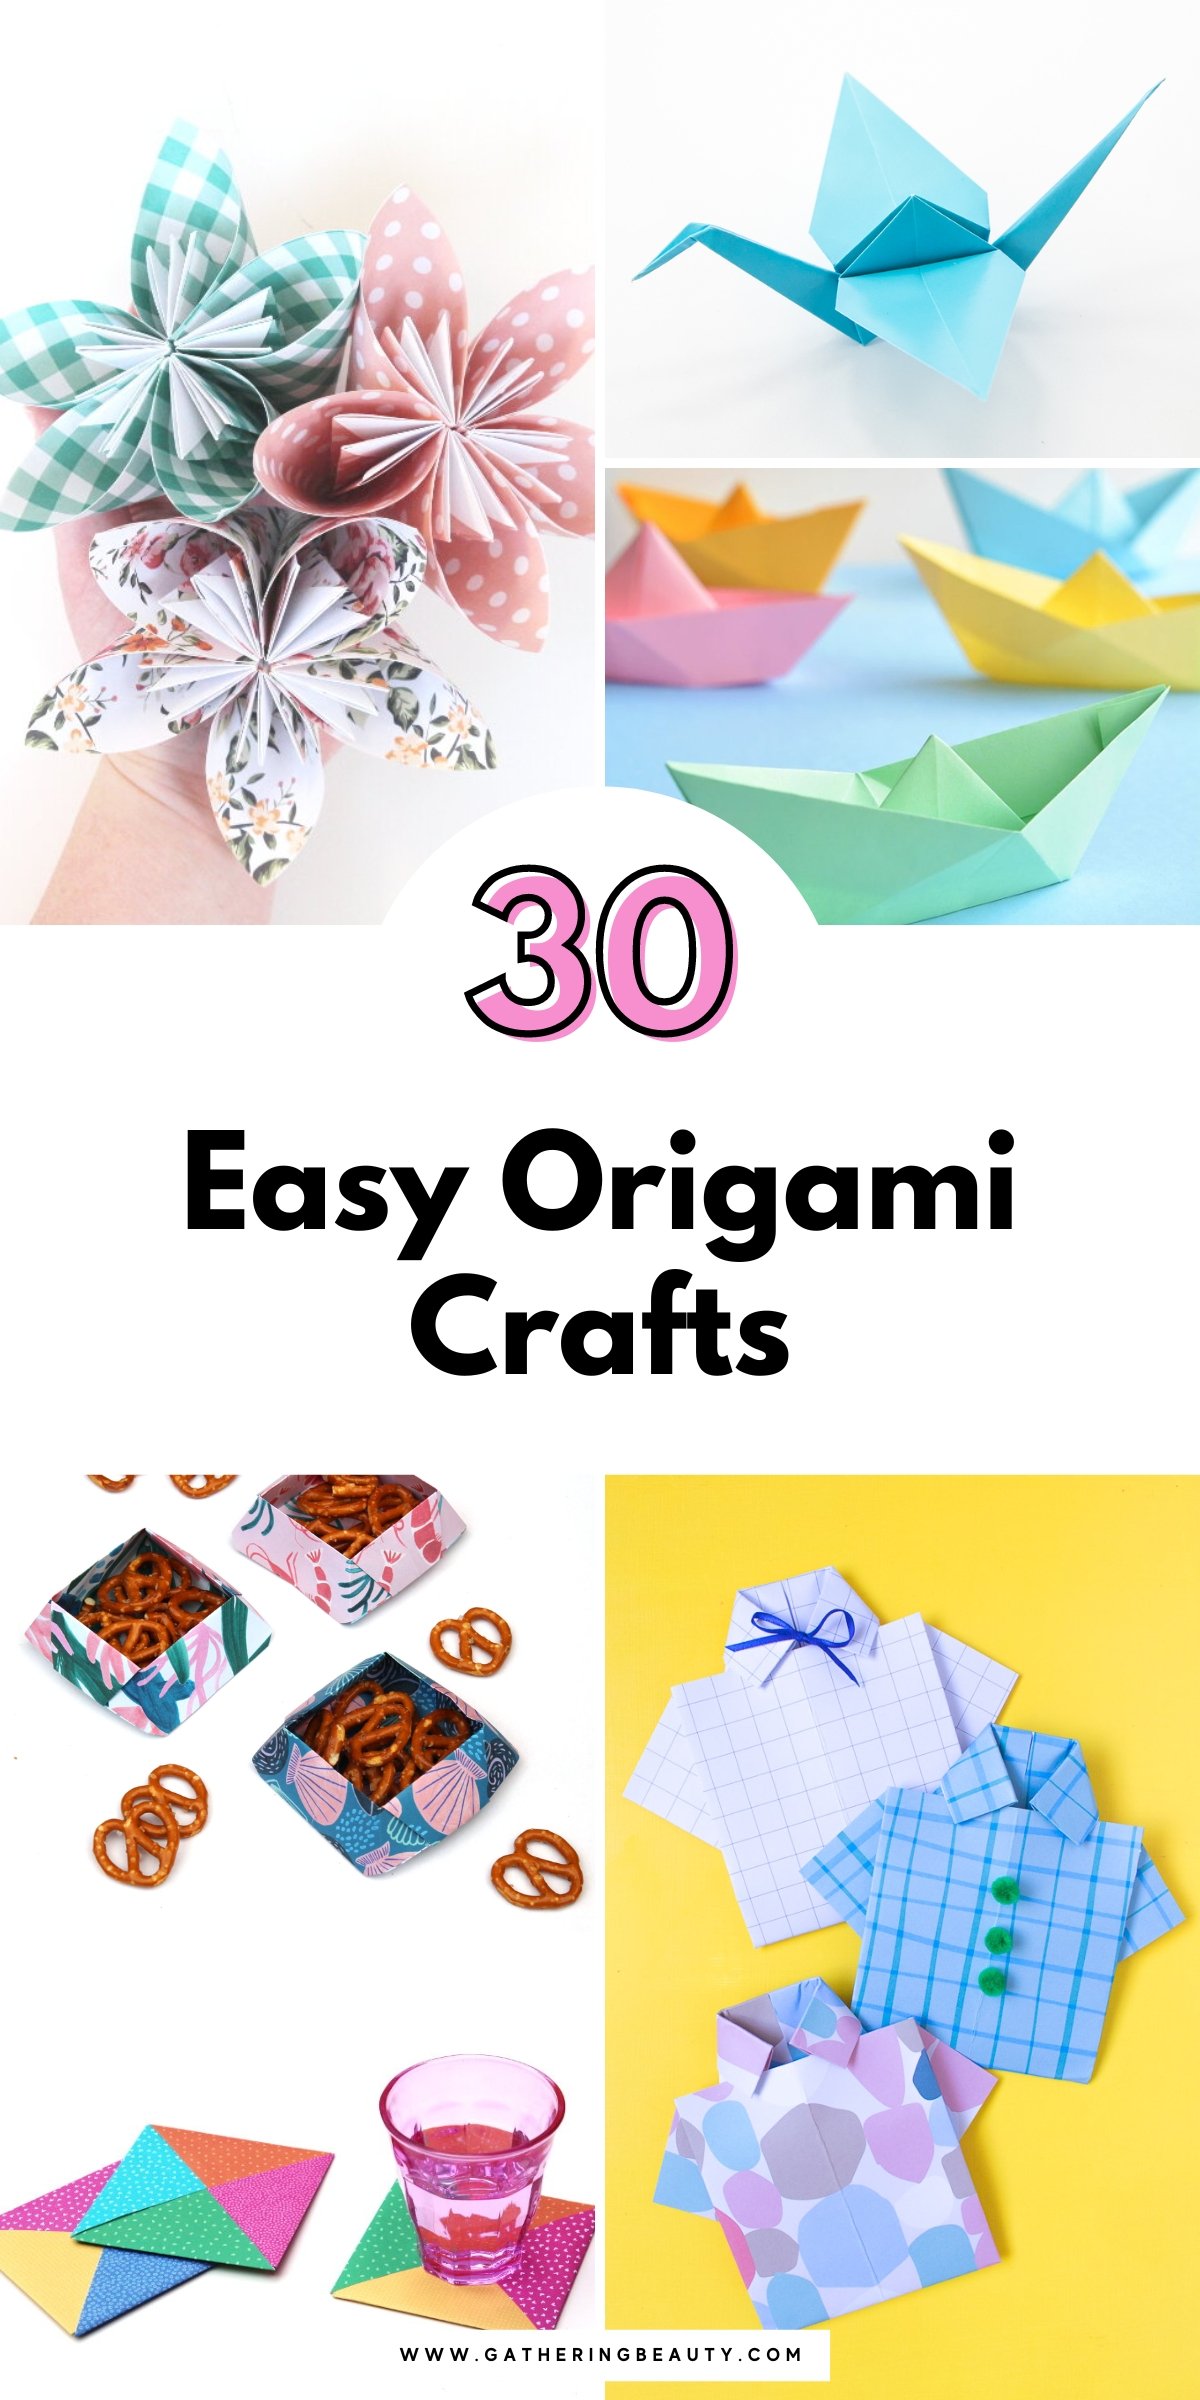 How to Make an Origami Photo Frame: 7 Steps (with Pictures)